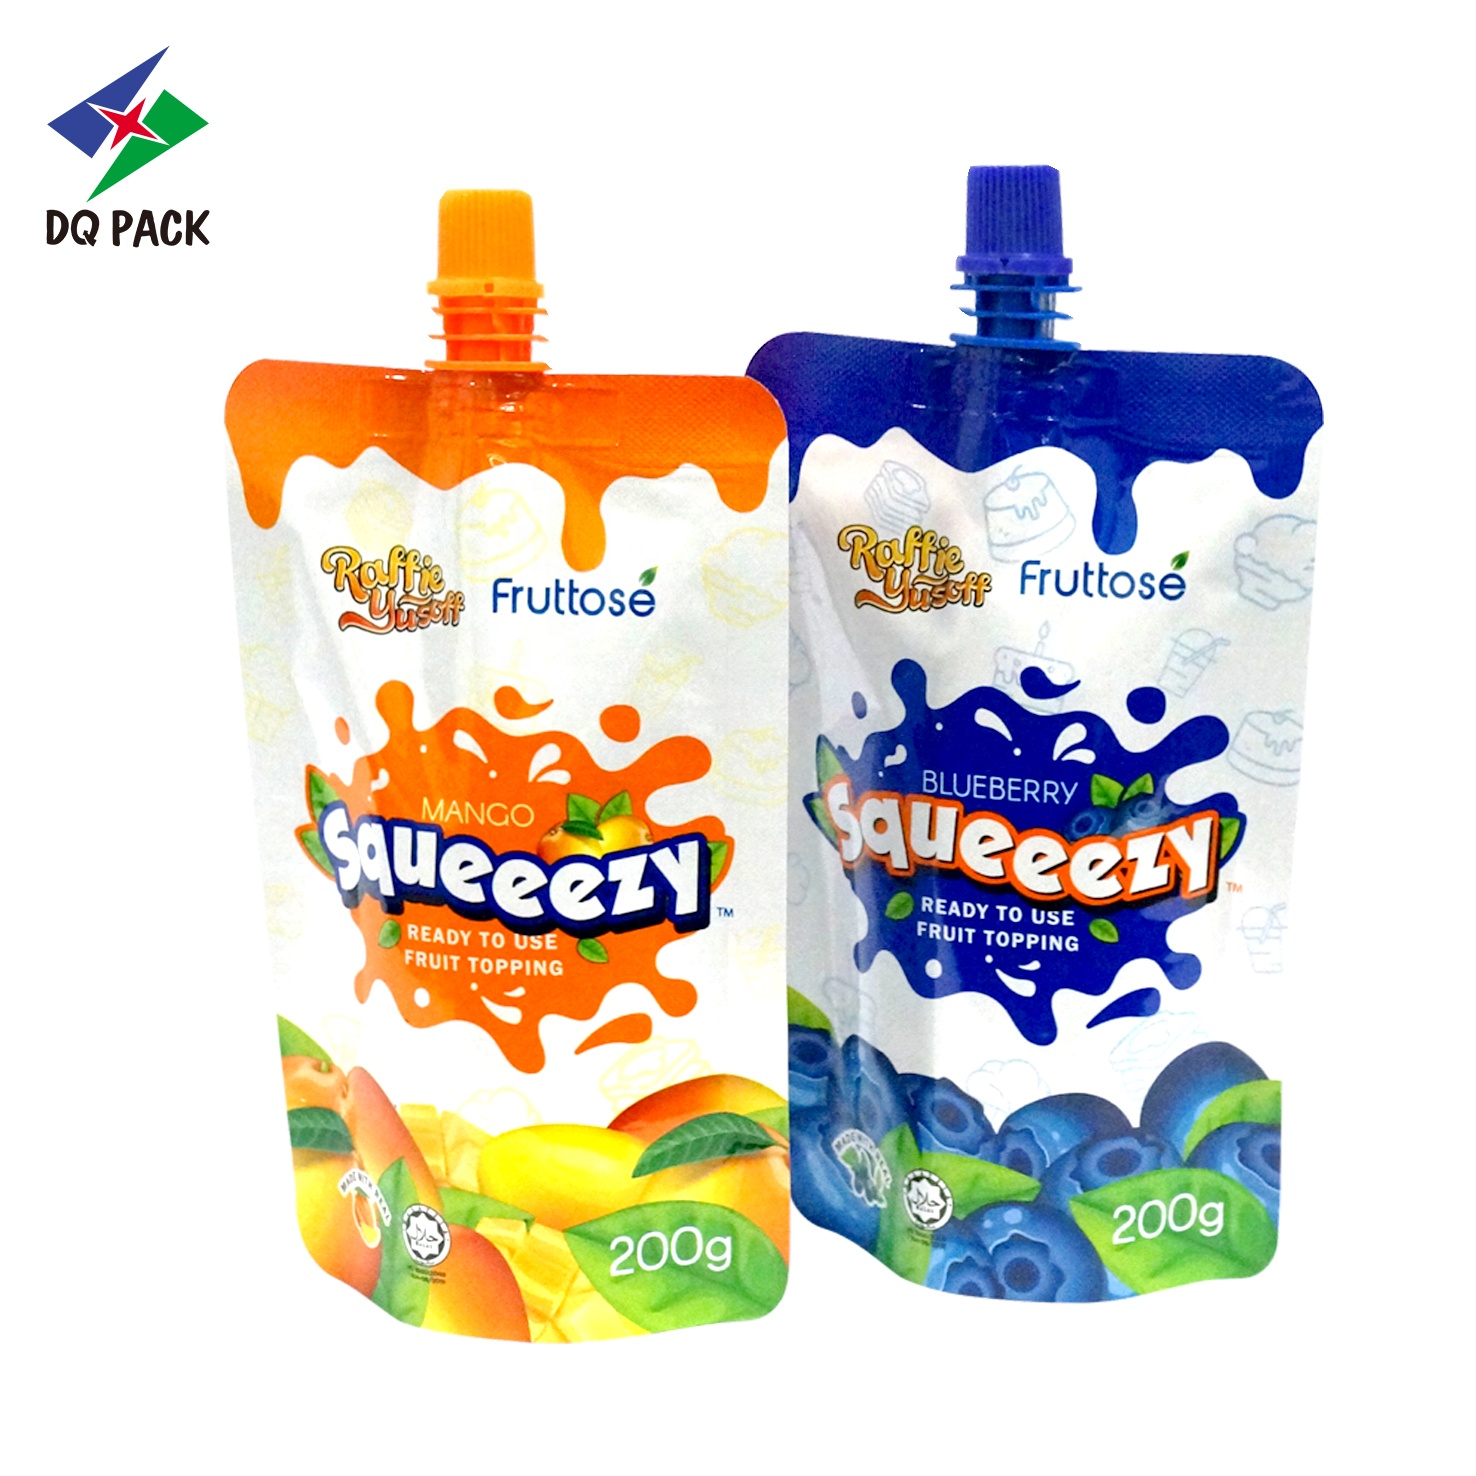 DQ PACK Wholesale Refill Plastic Bag Stand up spout pouches Doypack for fruit juice packaging supplier